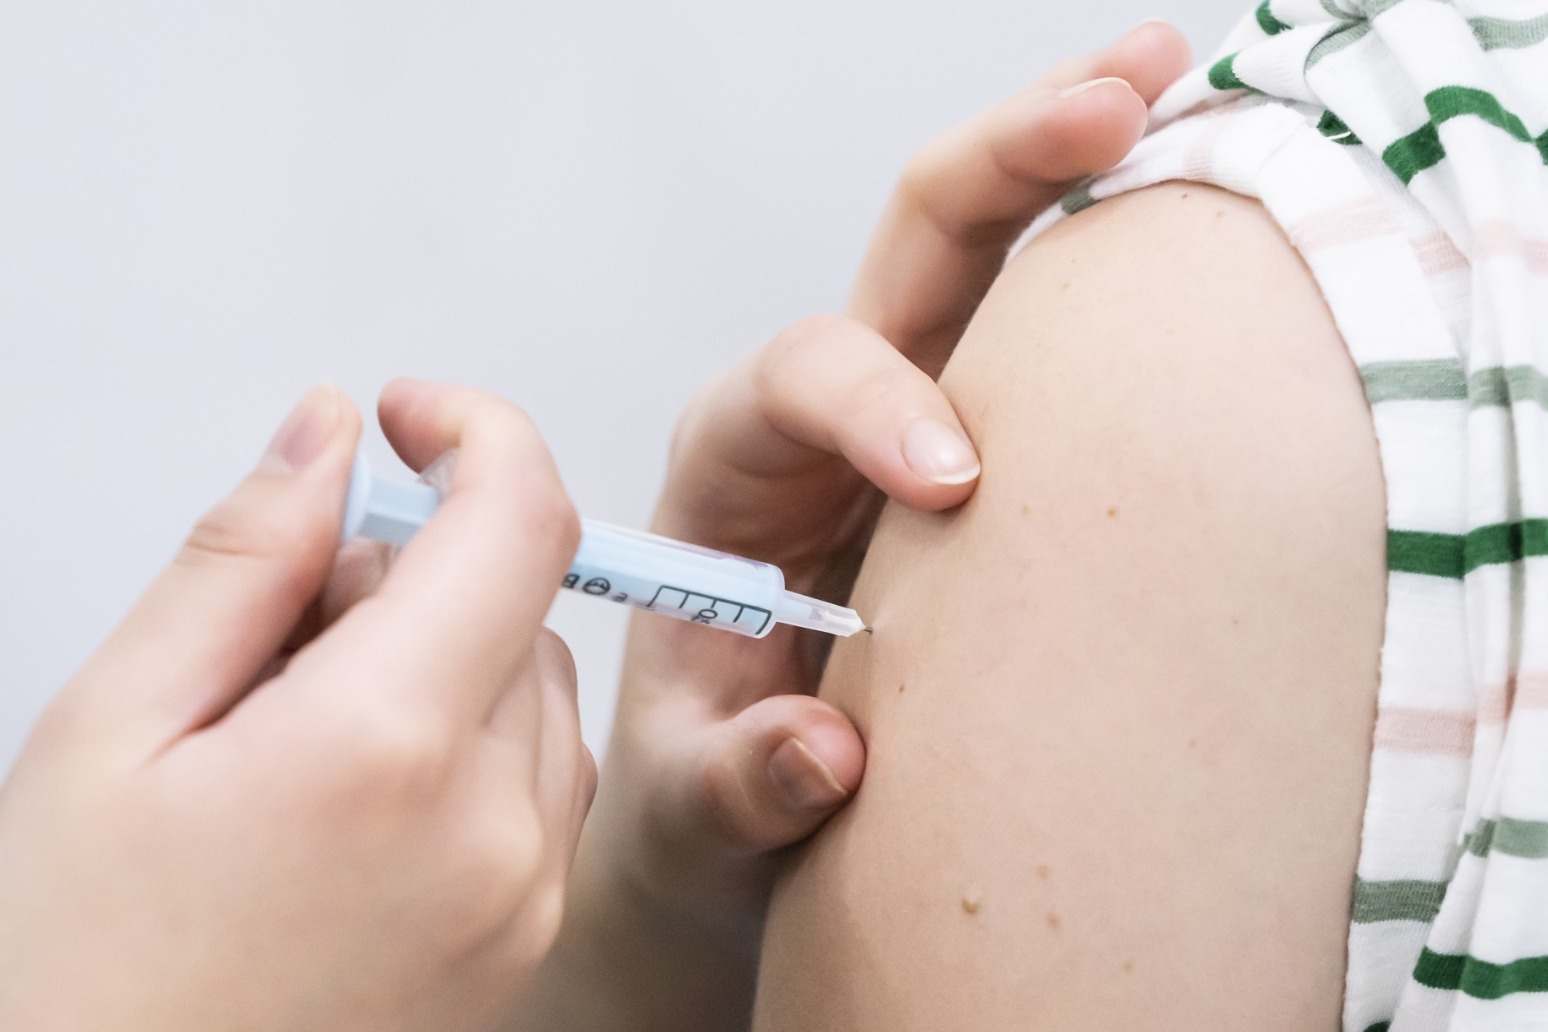 Millions urged to get flu and Covid jabs as experts predict difficult winter